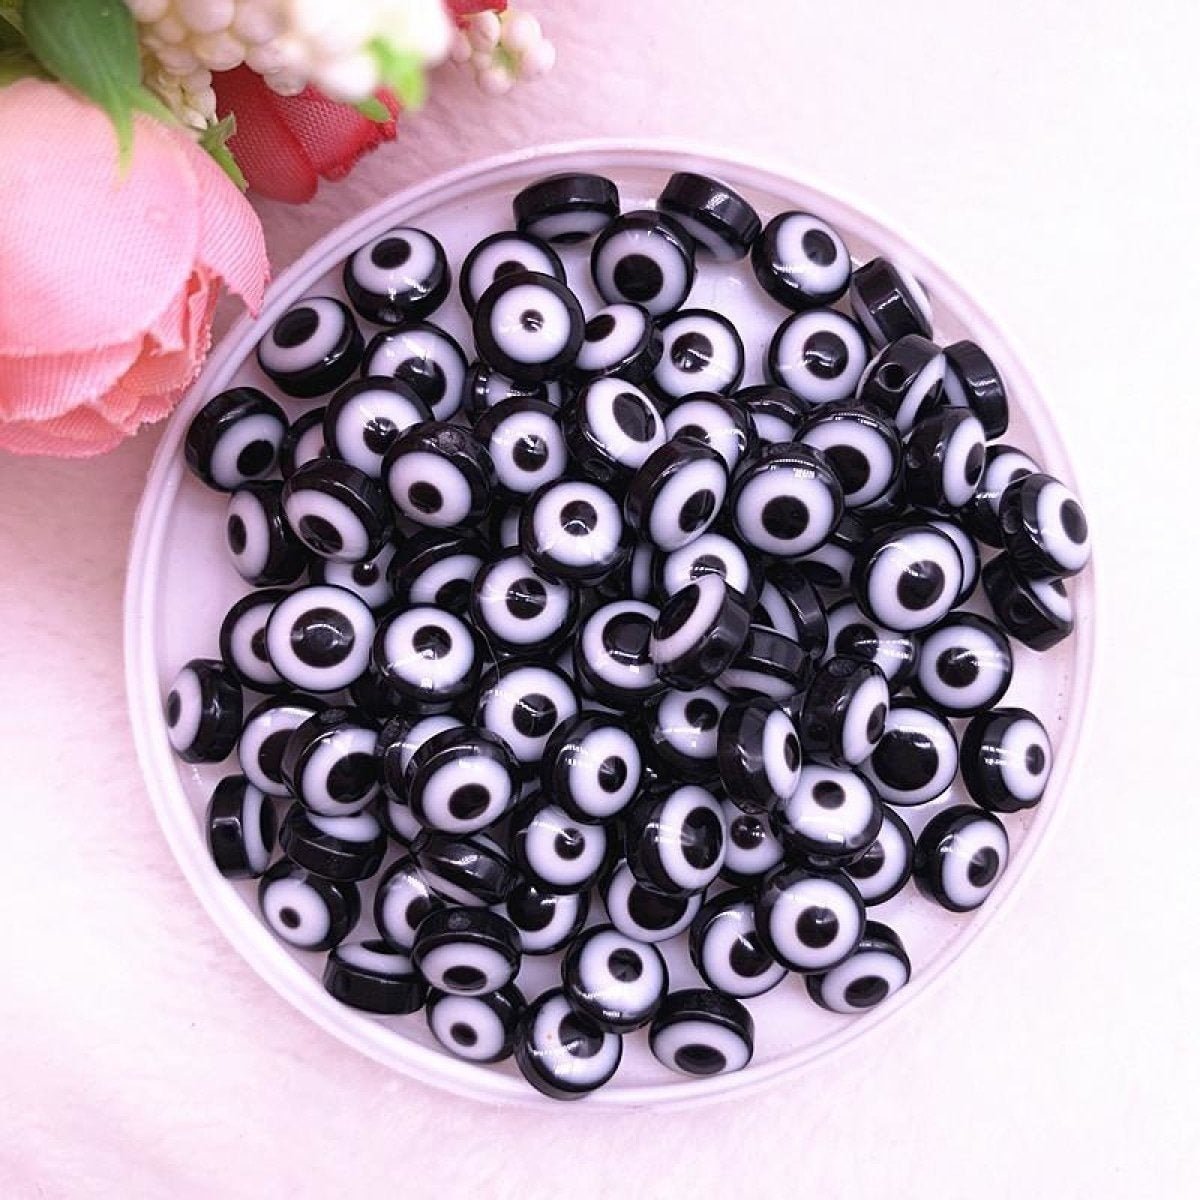 48pcs 8/10mm Oval Resin Spacer Beads Double Sided Eyes for Jewellery Making DIY Bracelet Beads Set B - Black 8mm - Asia Sell